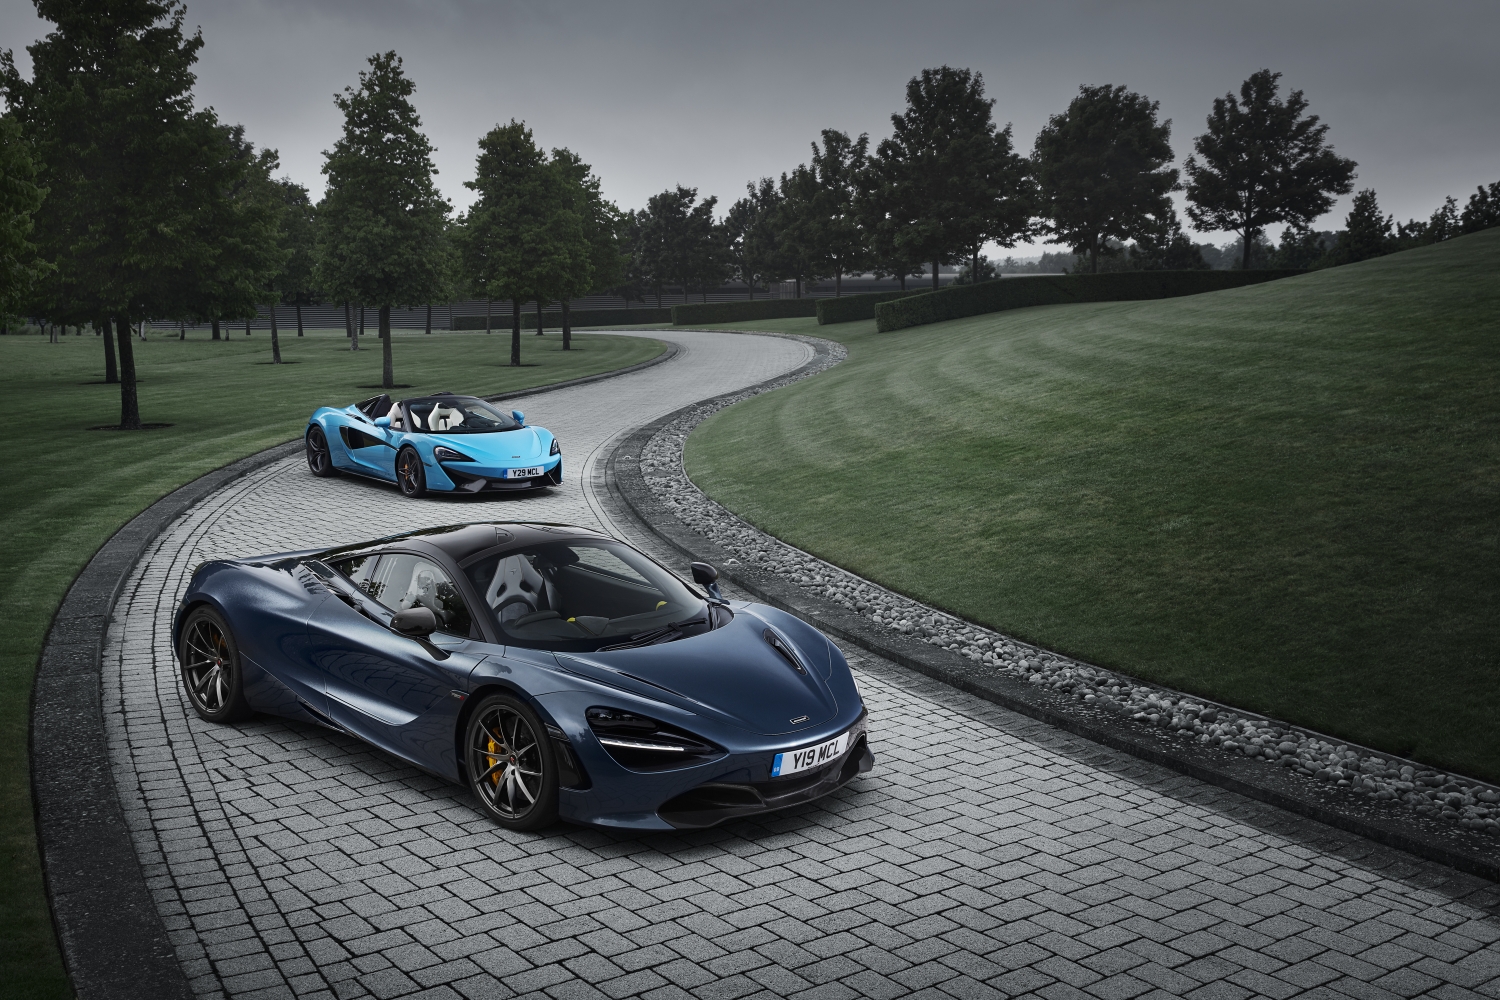 McLaren Automotive accelerates to fourth consecutive year of profitability from record sales in 2016